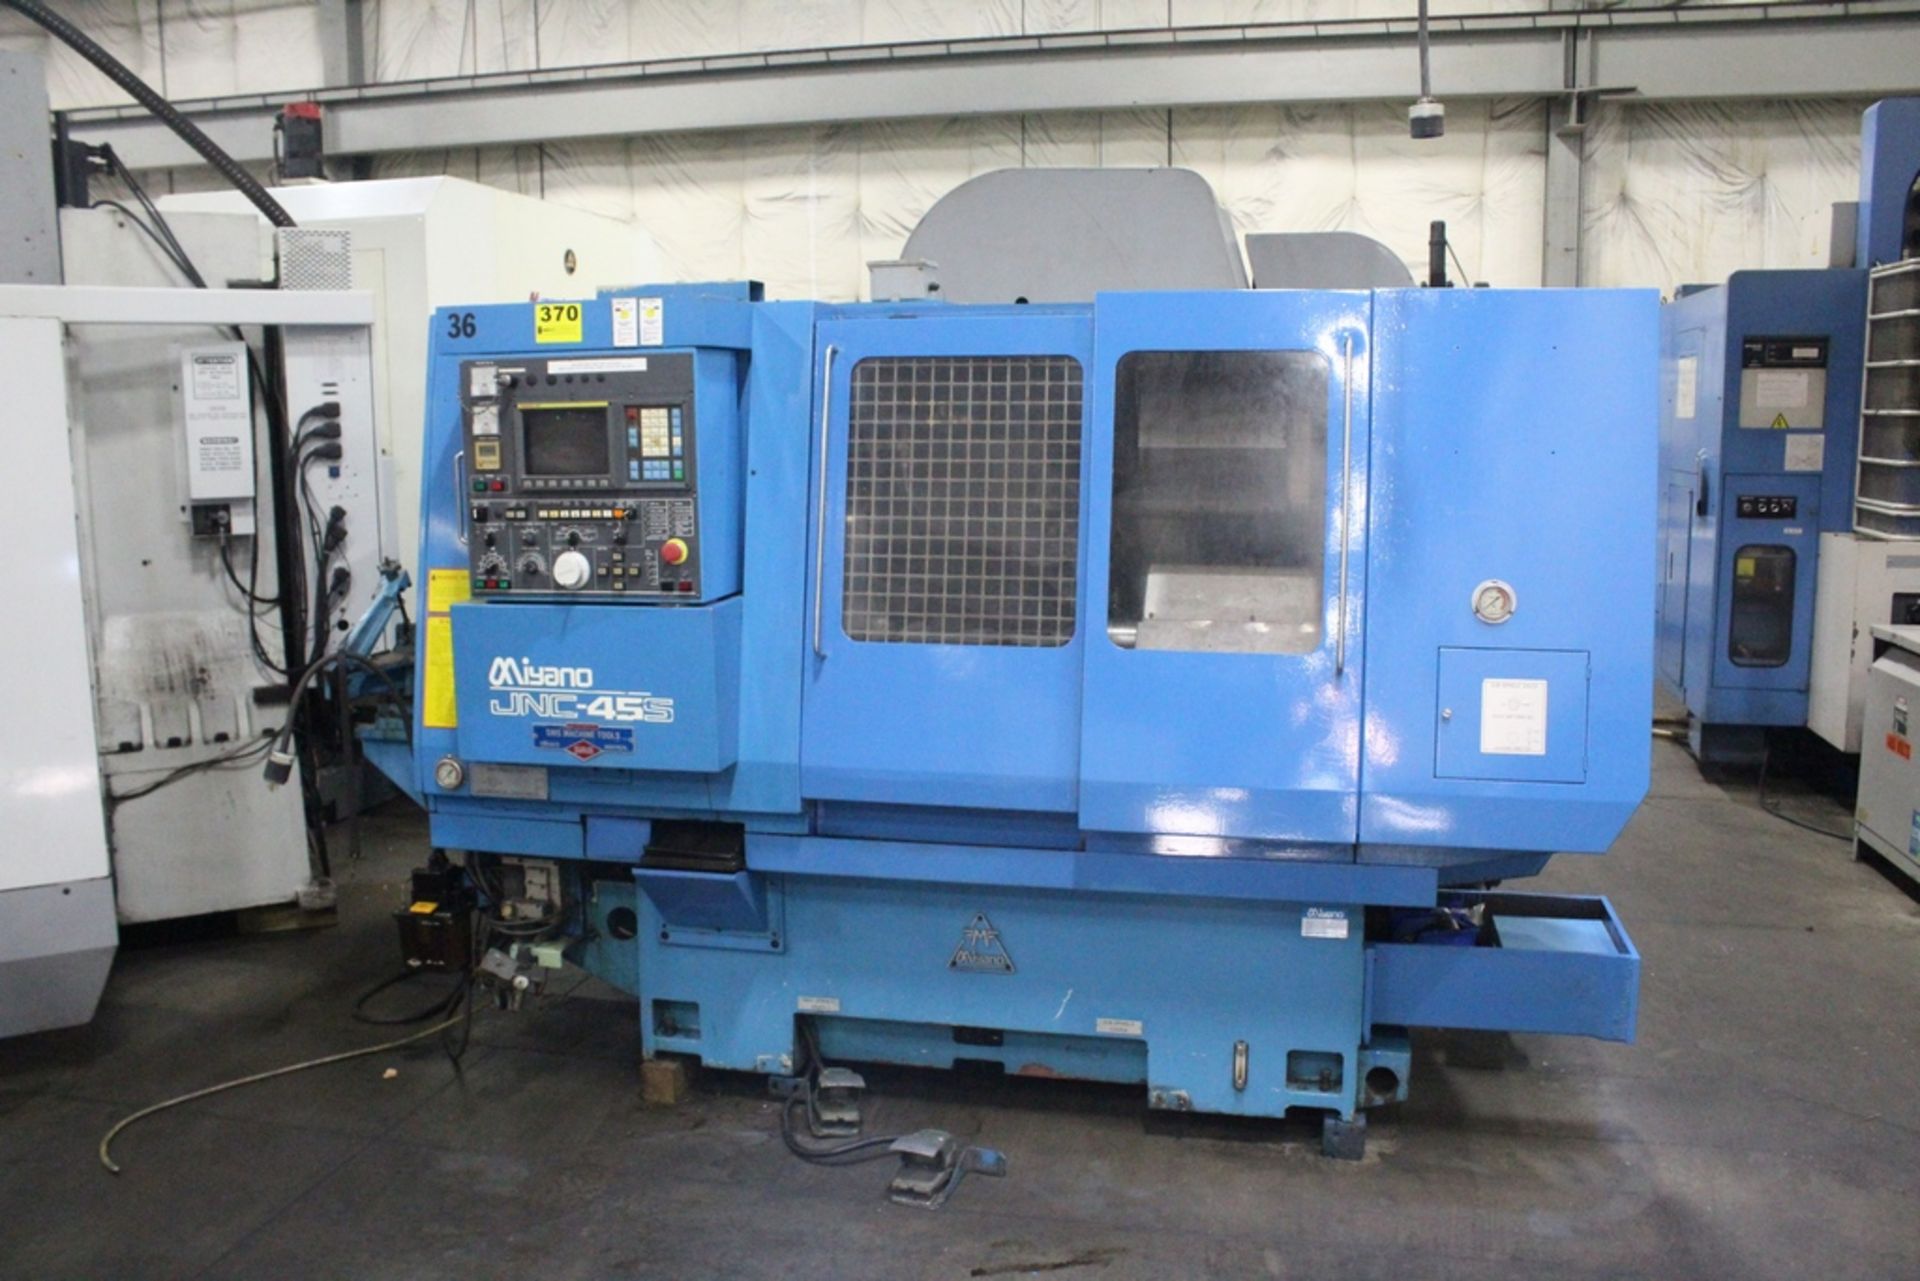 MIYANO MODEL JNC-455 CNC LATHE SUB SPINDLE, LIVE TOOLING, 8" CHUCK, SWING OVER BED: 20-5/16” (